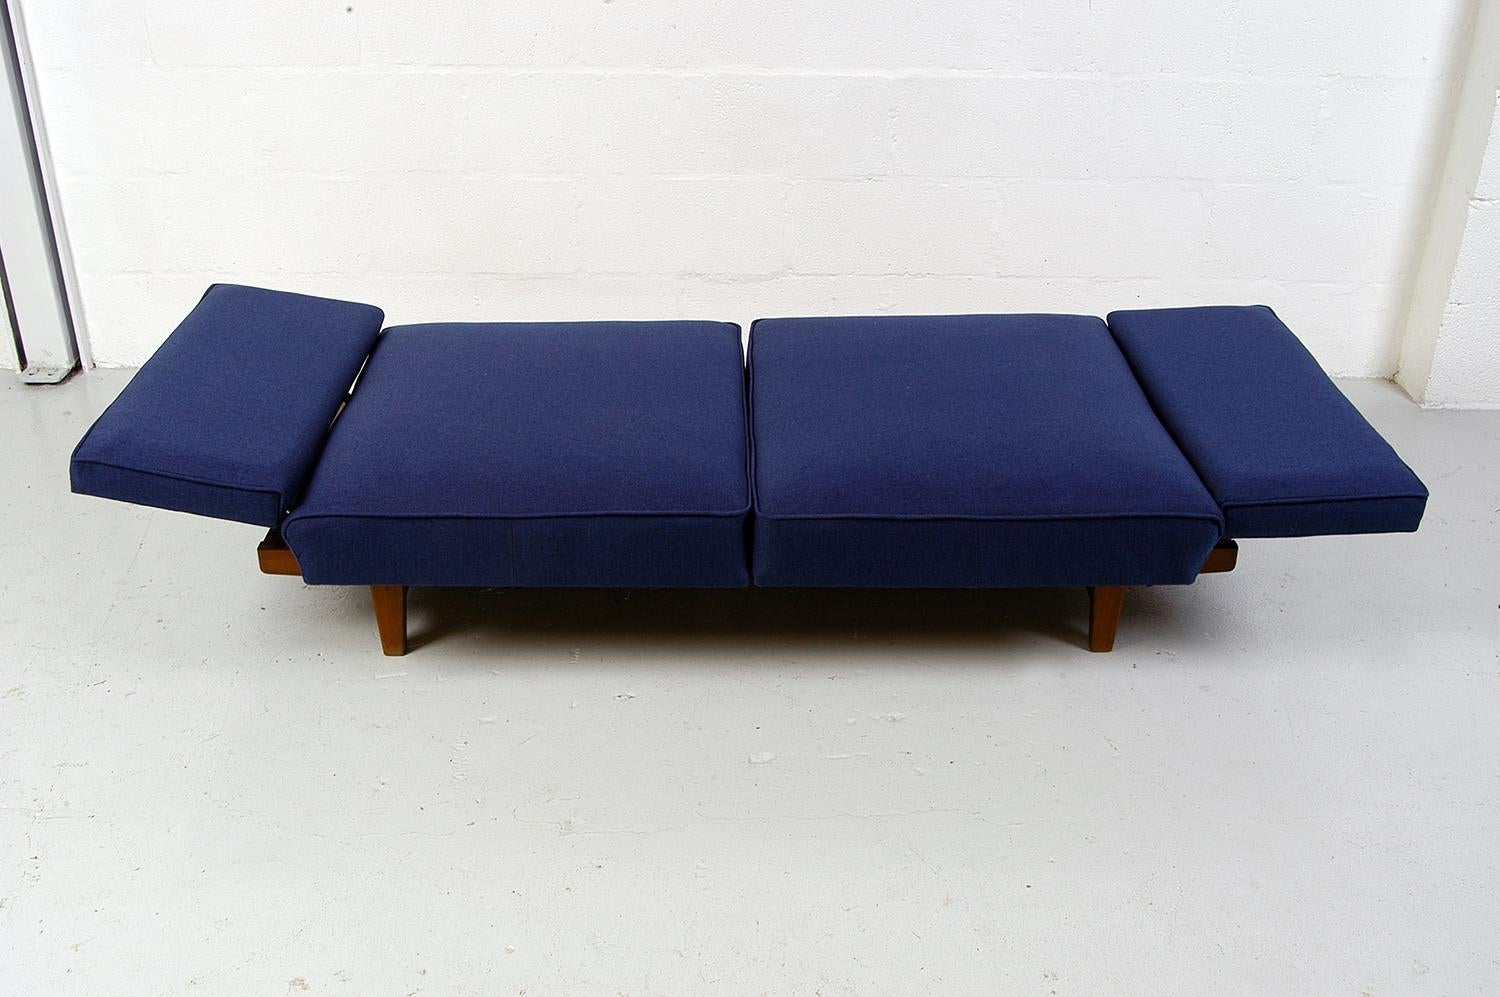 Vintage 1950s Mid-Century Modern Knoll 'Stella’ Convertible Daybed Sofa Couch 2